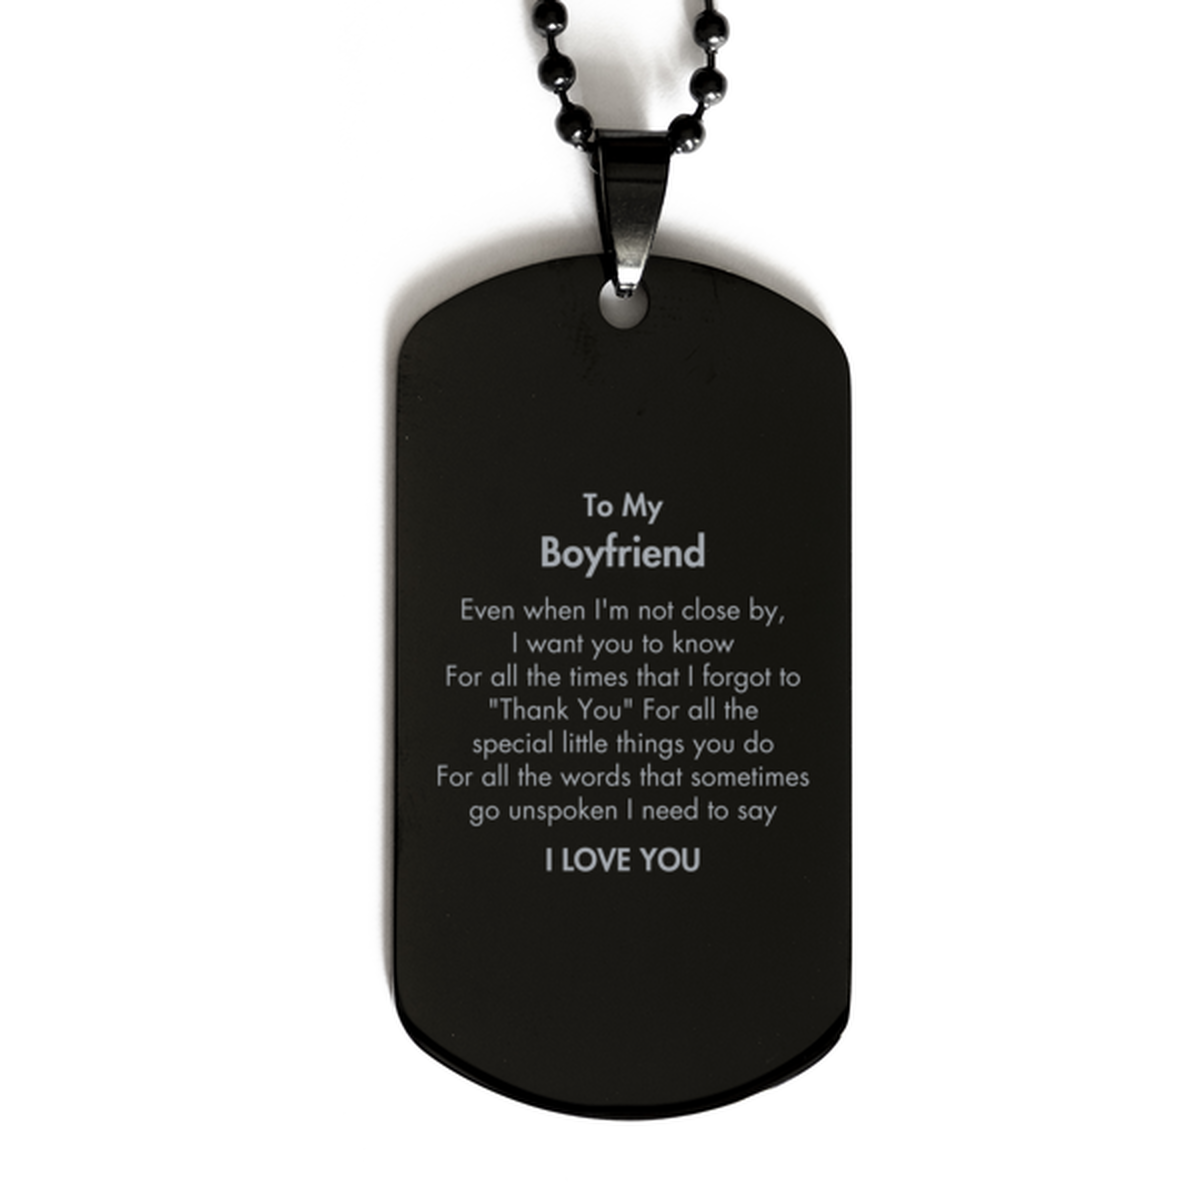 Thank You Gifts for Boyfriend, Keepsake Black Dog Tag Gifts for Boyfriend Birthday Mother's day Father's Day Boyfriend For all the words That sometimes go unspoken I need to say I LOVE YOU